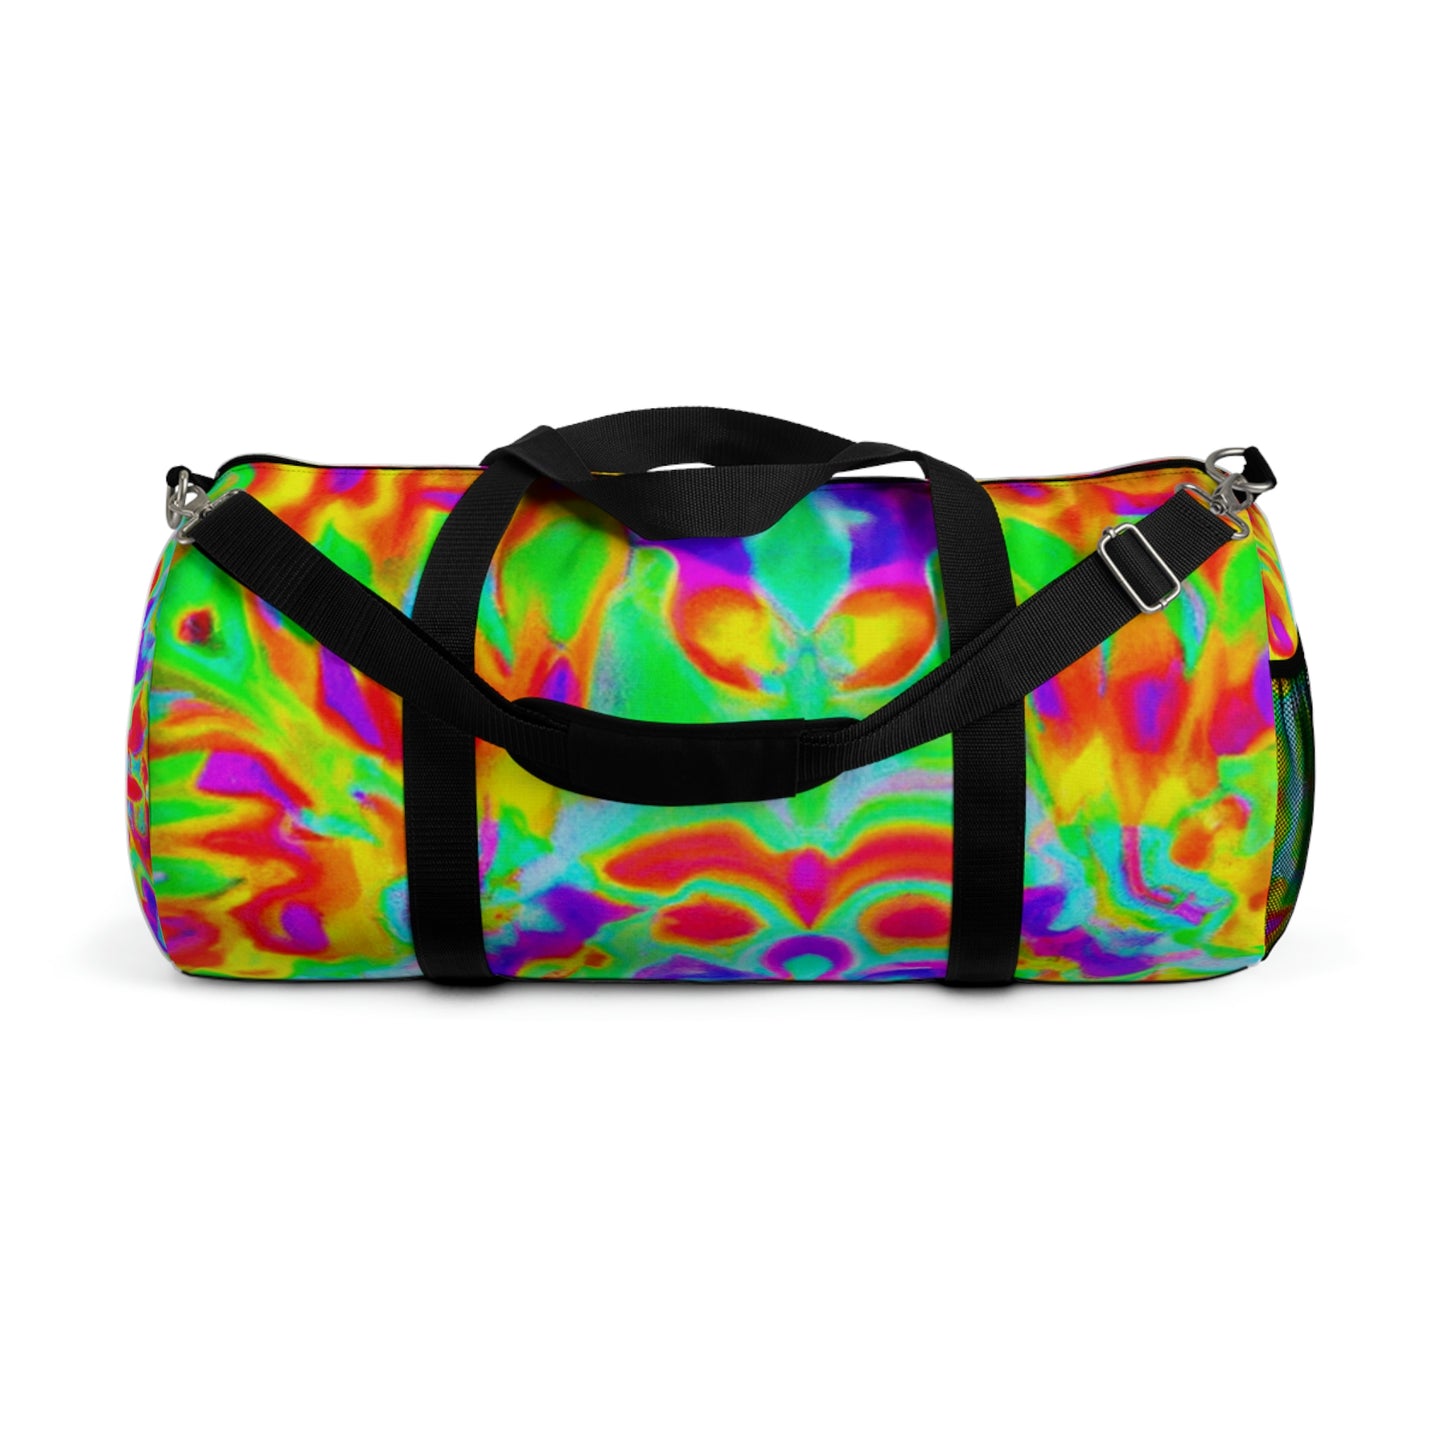 Sachi Couture - Psychedelic Duffel Bag